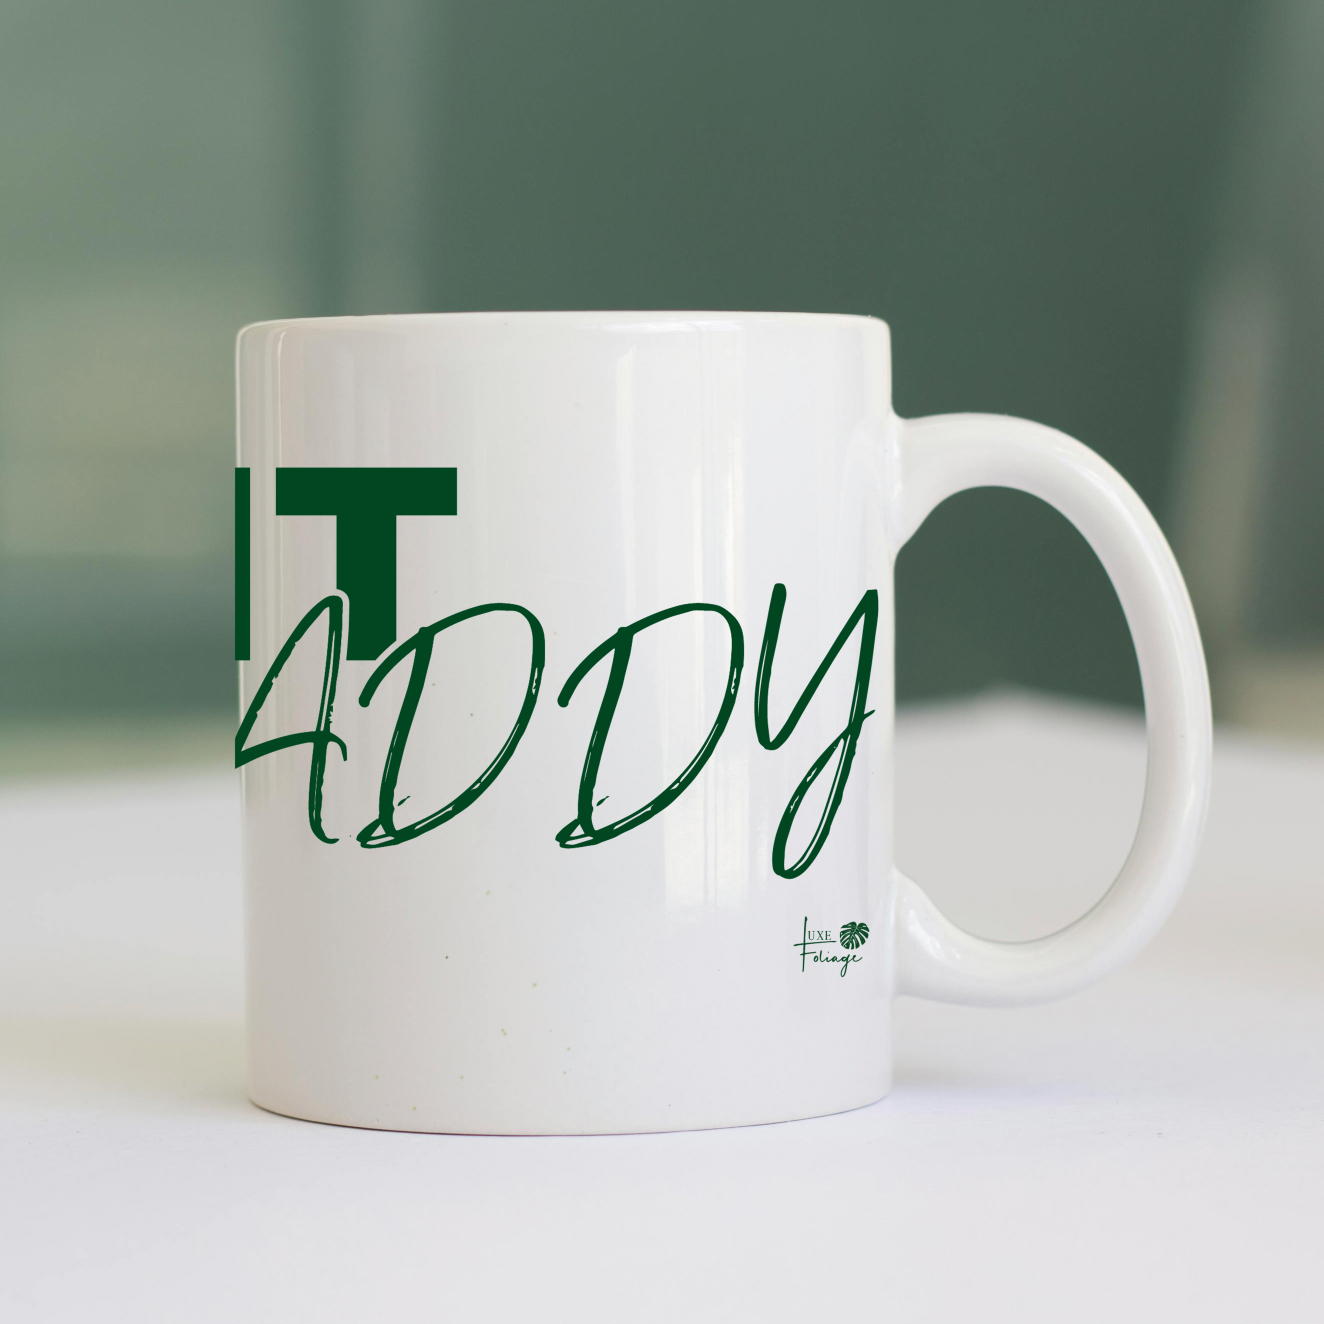 'Plant Daddy' Coffee Cup